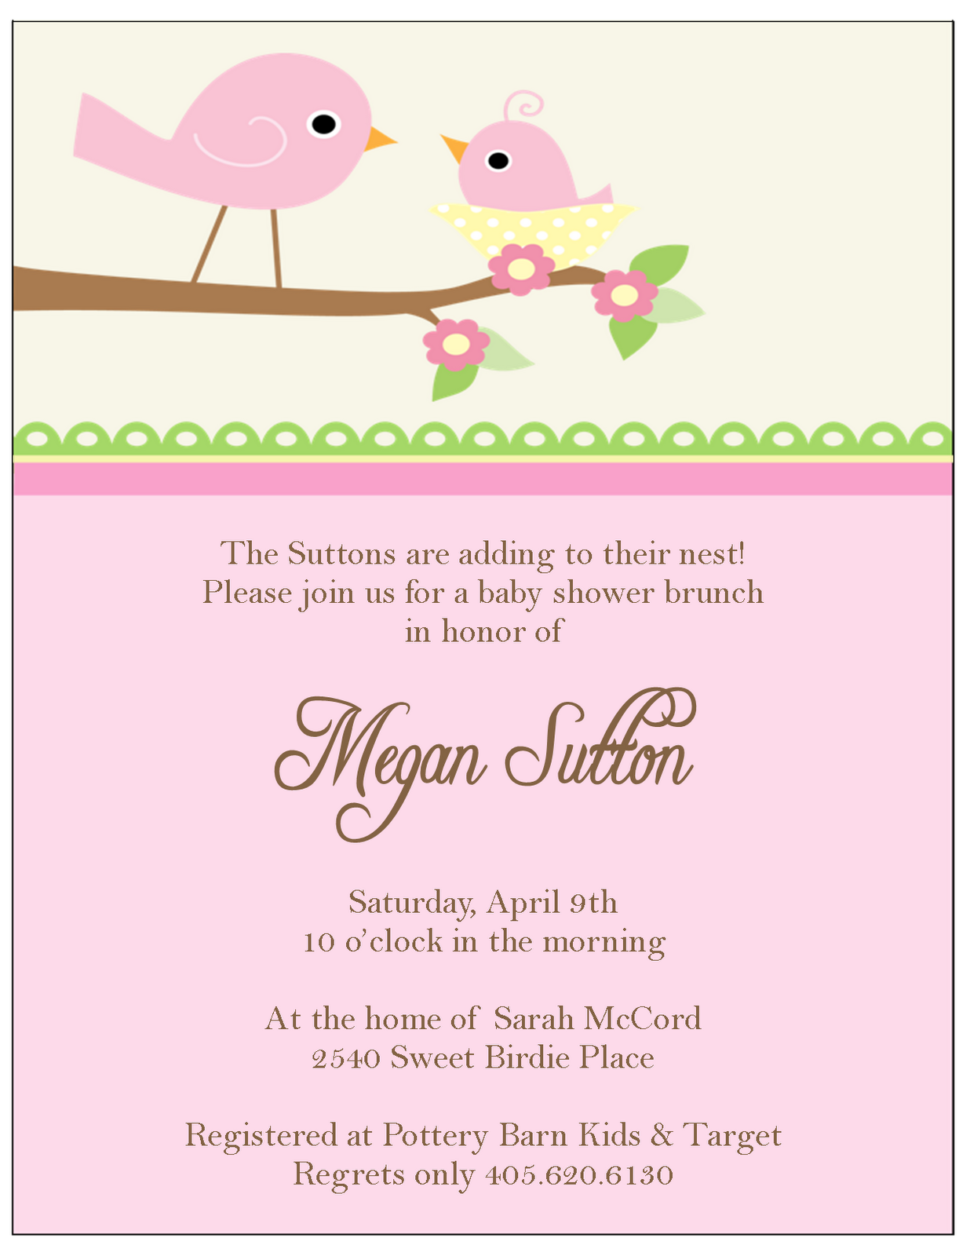 Medium Size of Baby Shower:63+ Delightful Cheap Baby Shower Invitations Image Inspirations Cheap Baby Shower Invitations Baby Shower Accessories Baby Shower Host Save The Date Baby Shower Baby Shower Paper Full Size Of Colorsbaby Shower Invites For Stylish Baby Shower For Cake